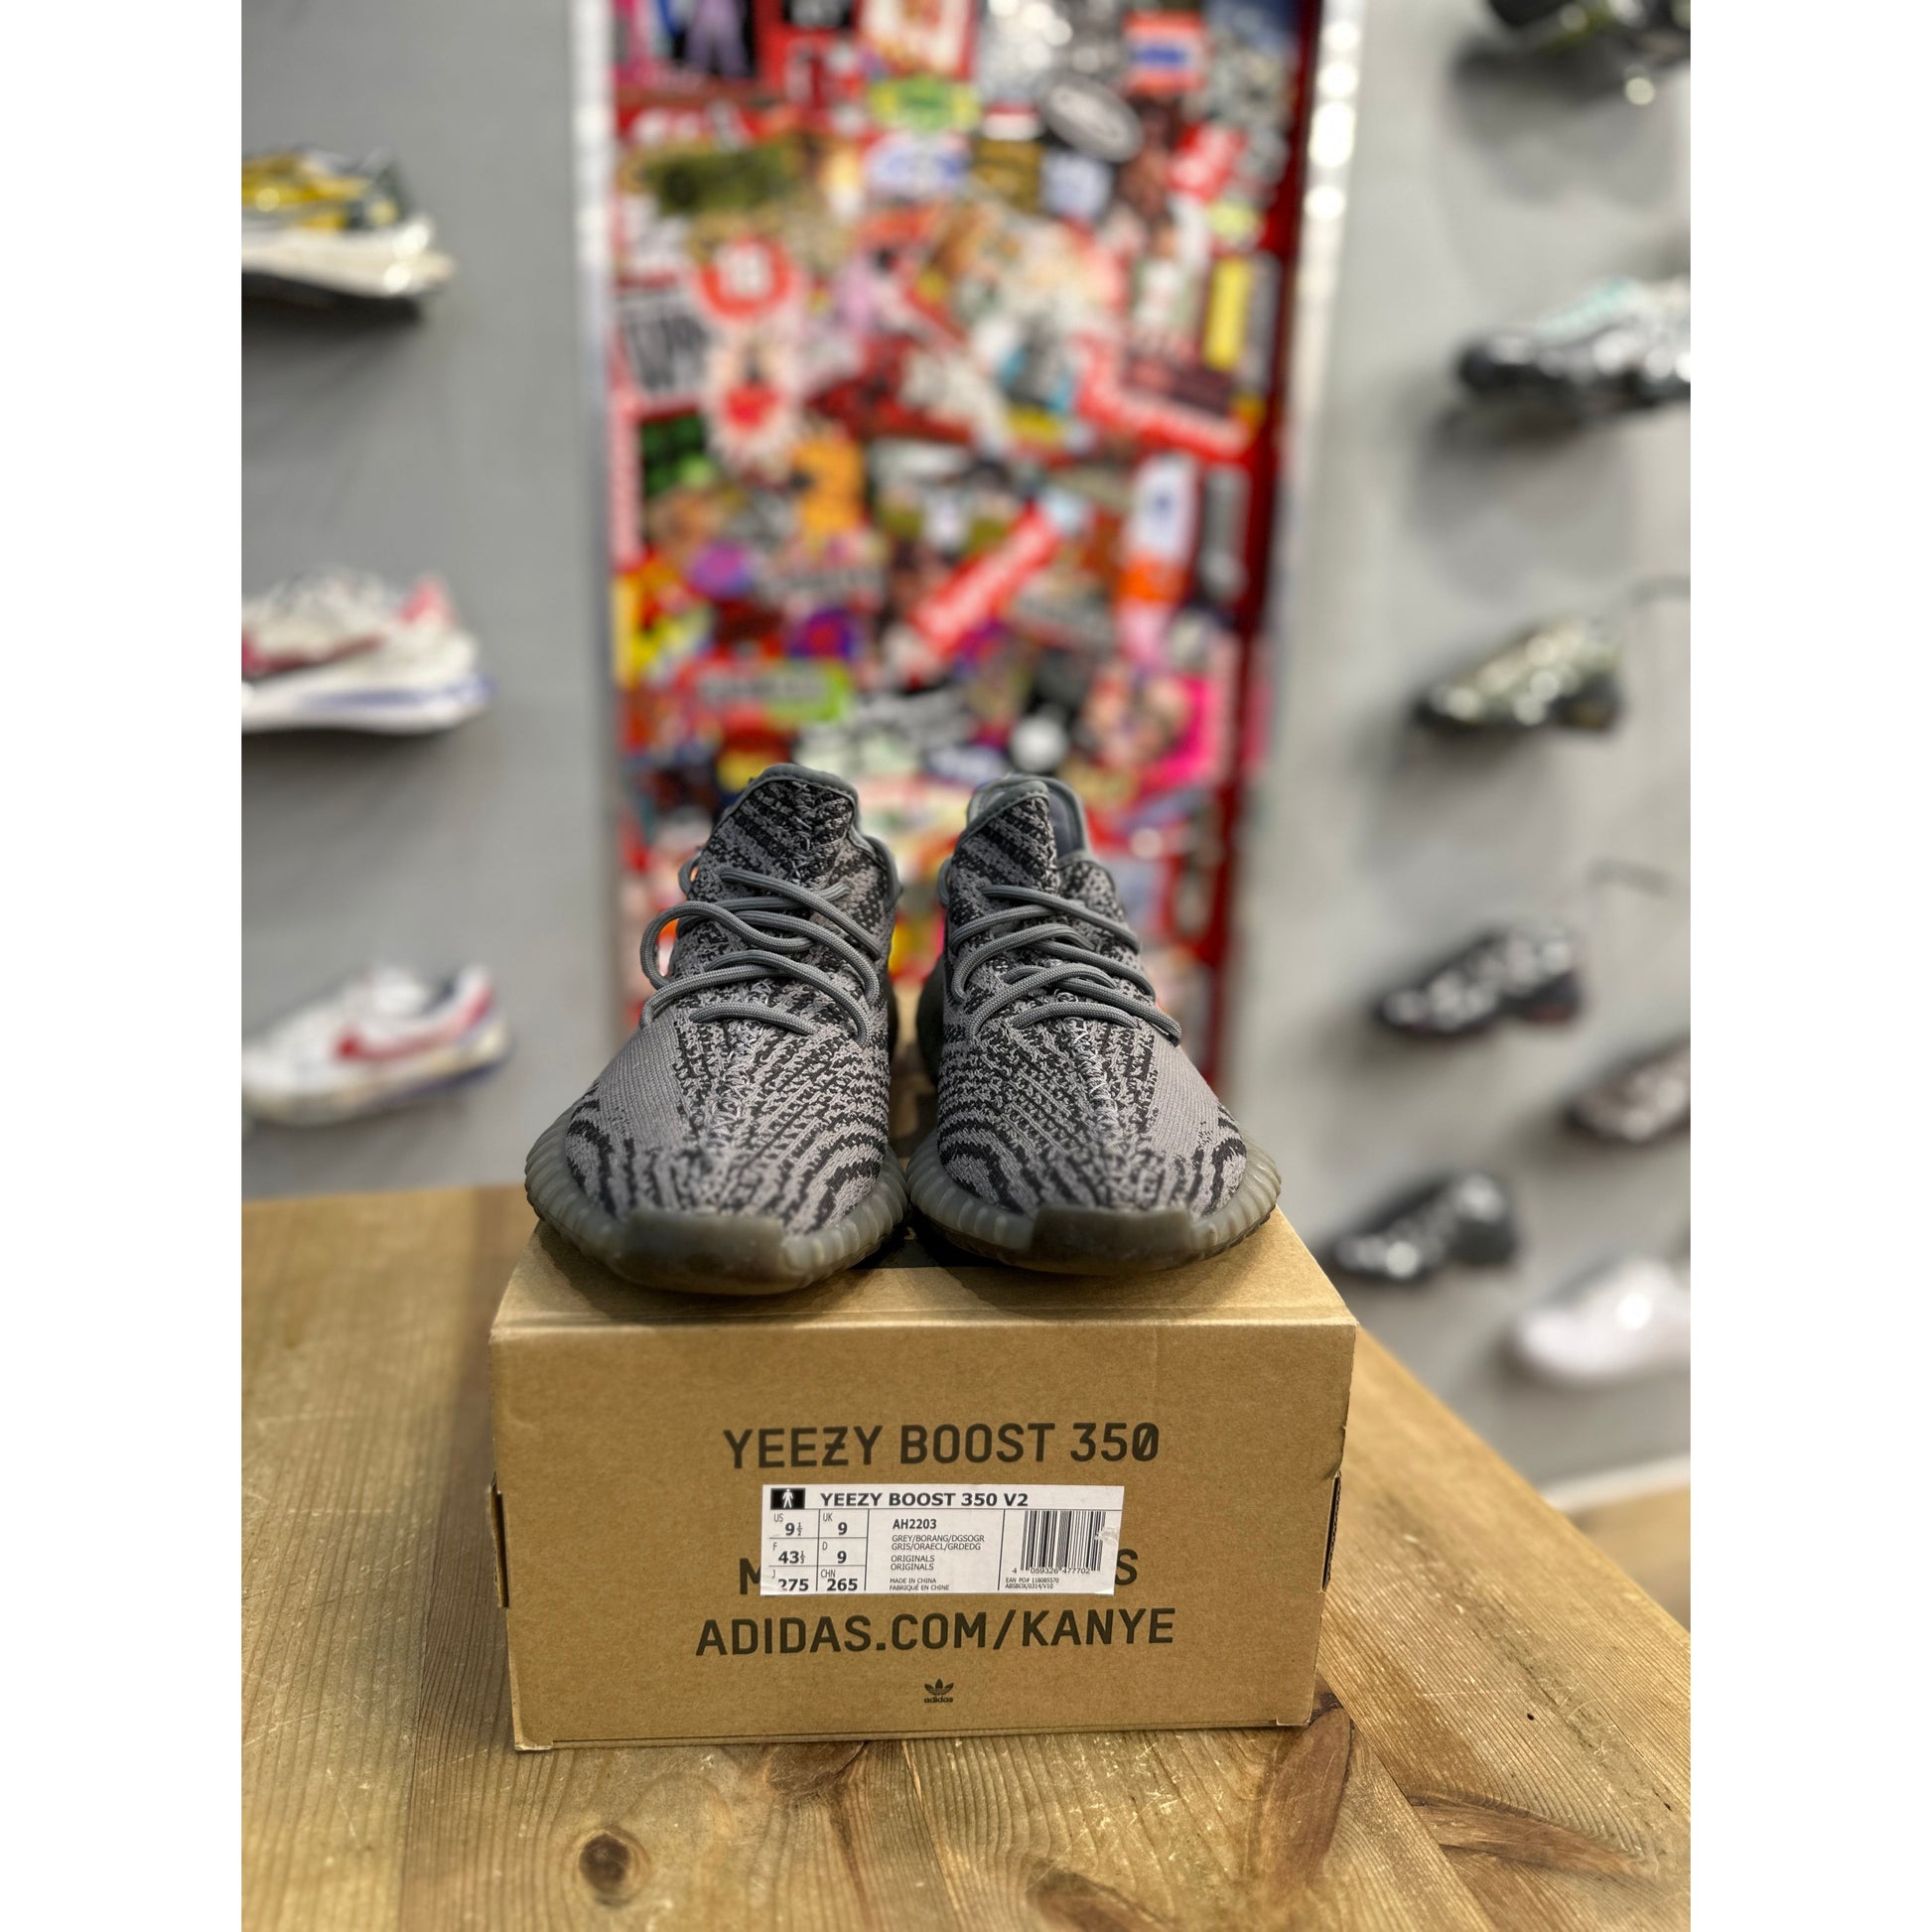 adidas Yeezy Boost 350 V2 Beluga 2.0 UK 9 by Yeezy from £150.00